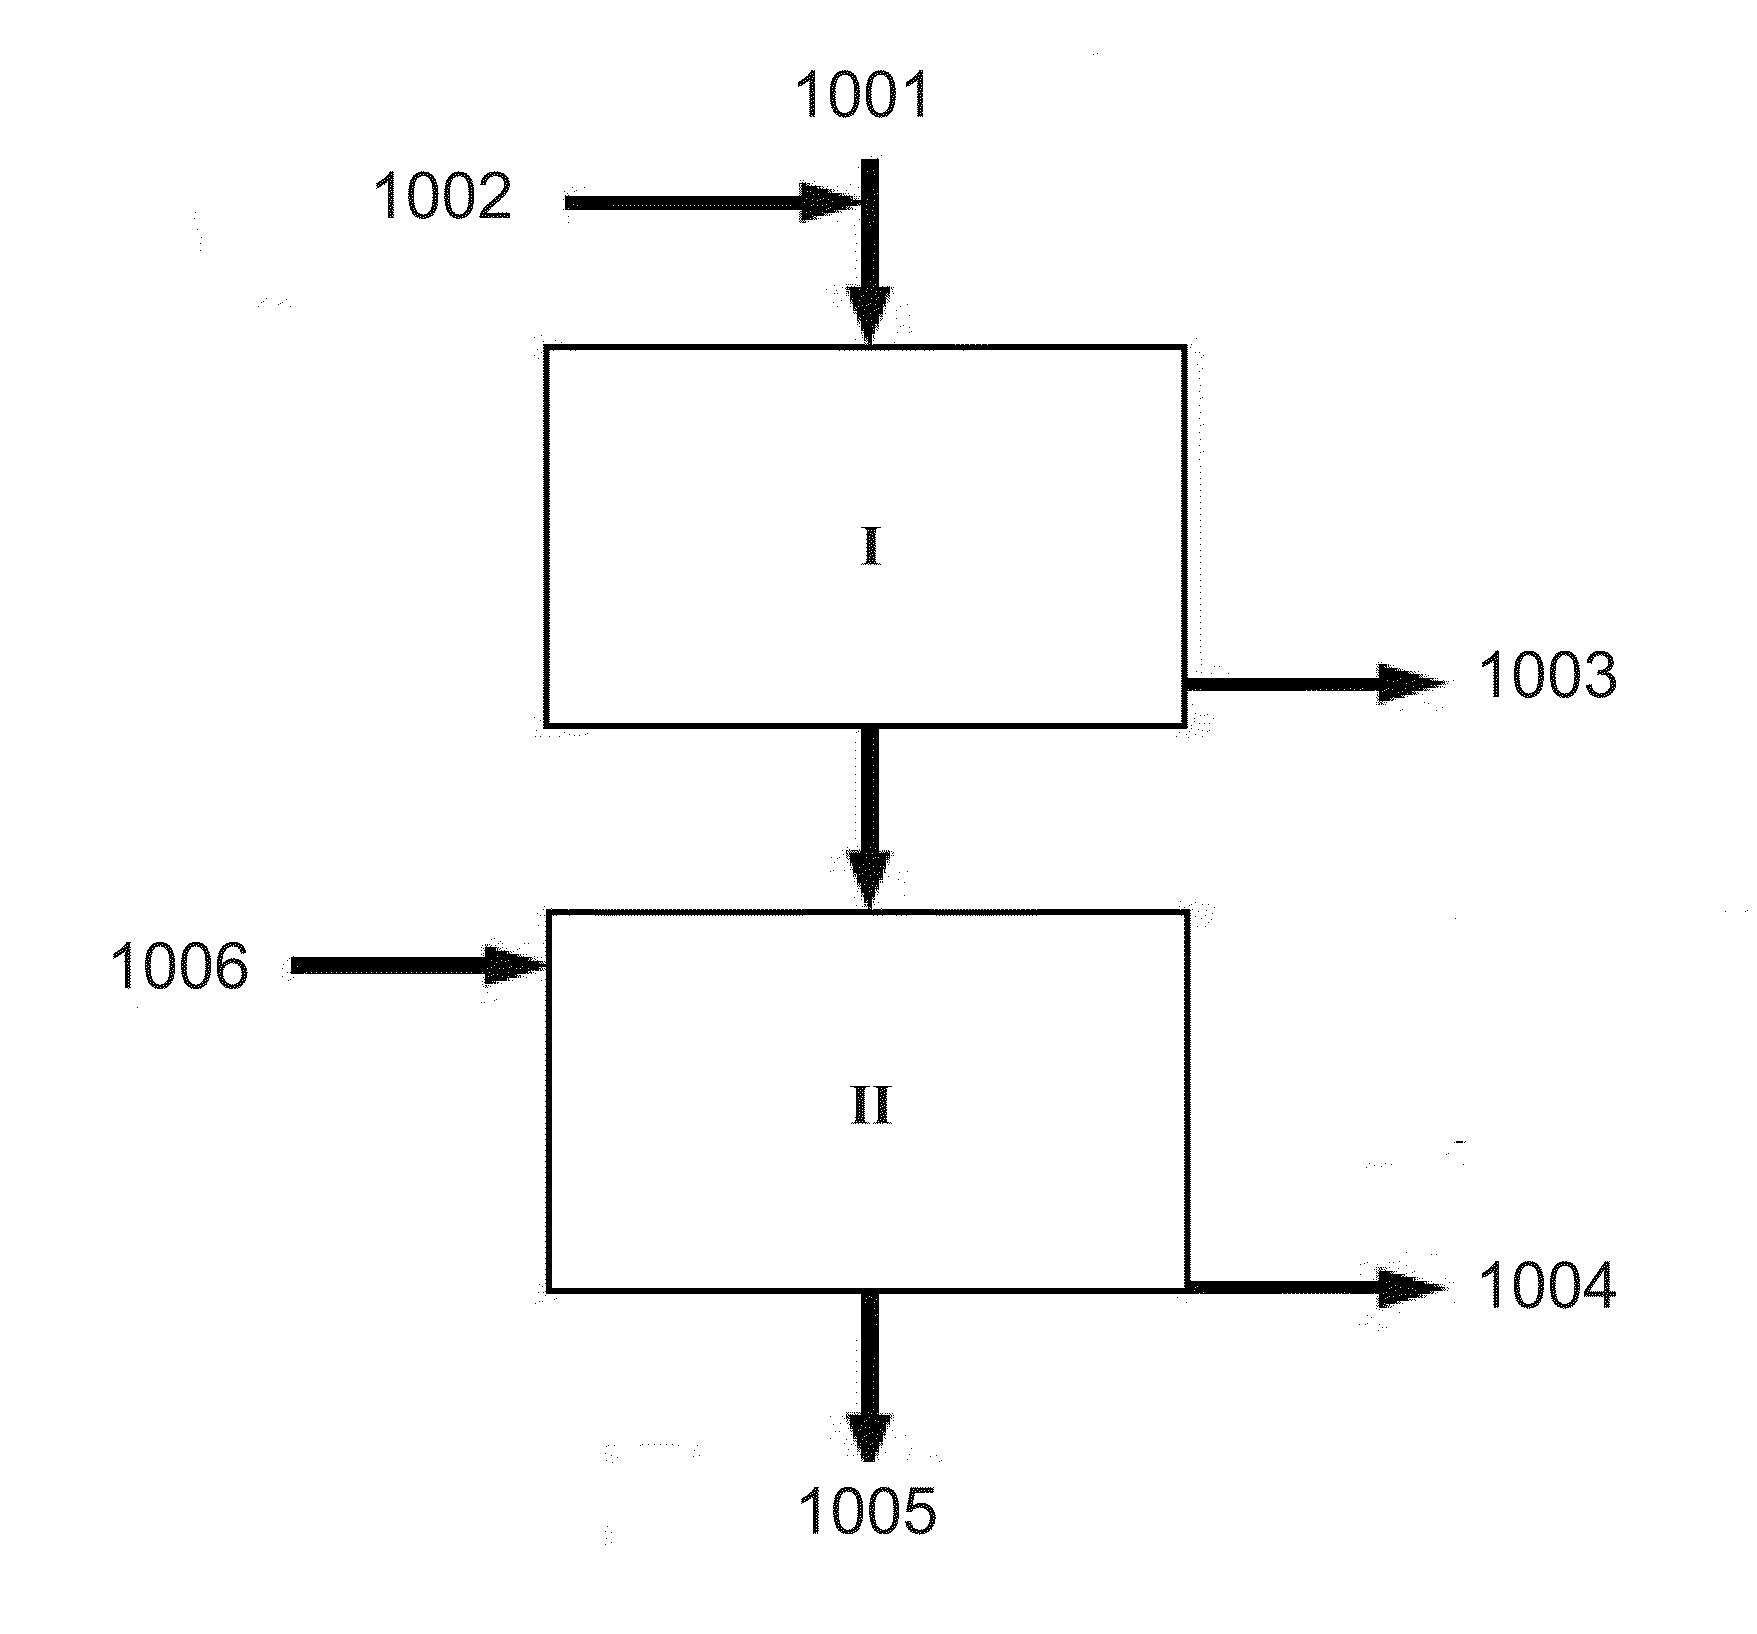 System and method for carbon dioxide capture and sequestration from relatively high concentration co2 mixtures